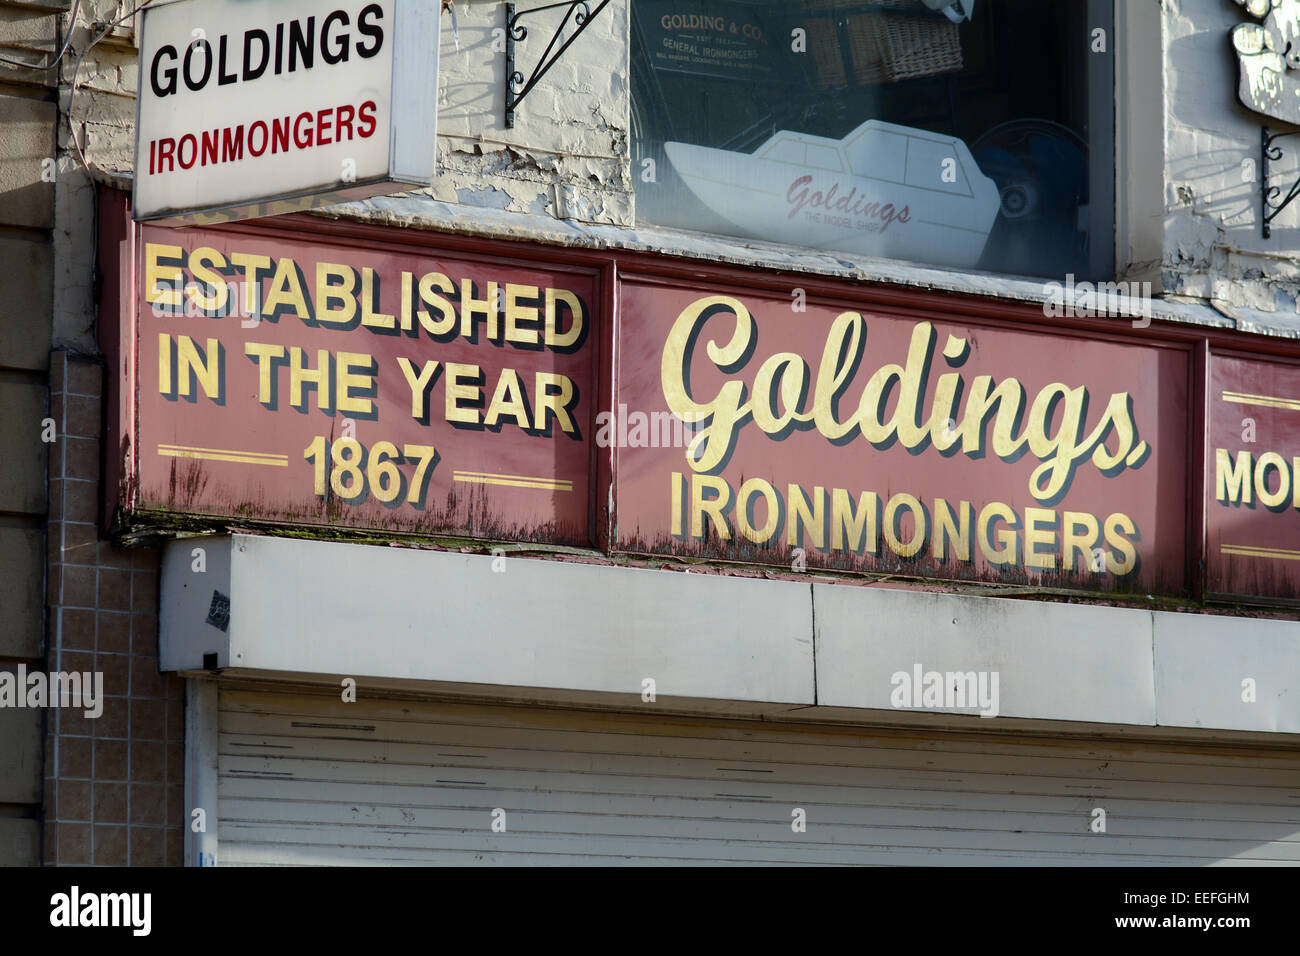 Goldings Ironmongers shop established in 1867 in Bedford, Bedfordshire, England Stock Photo